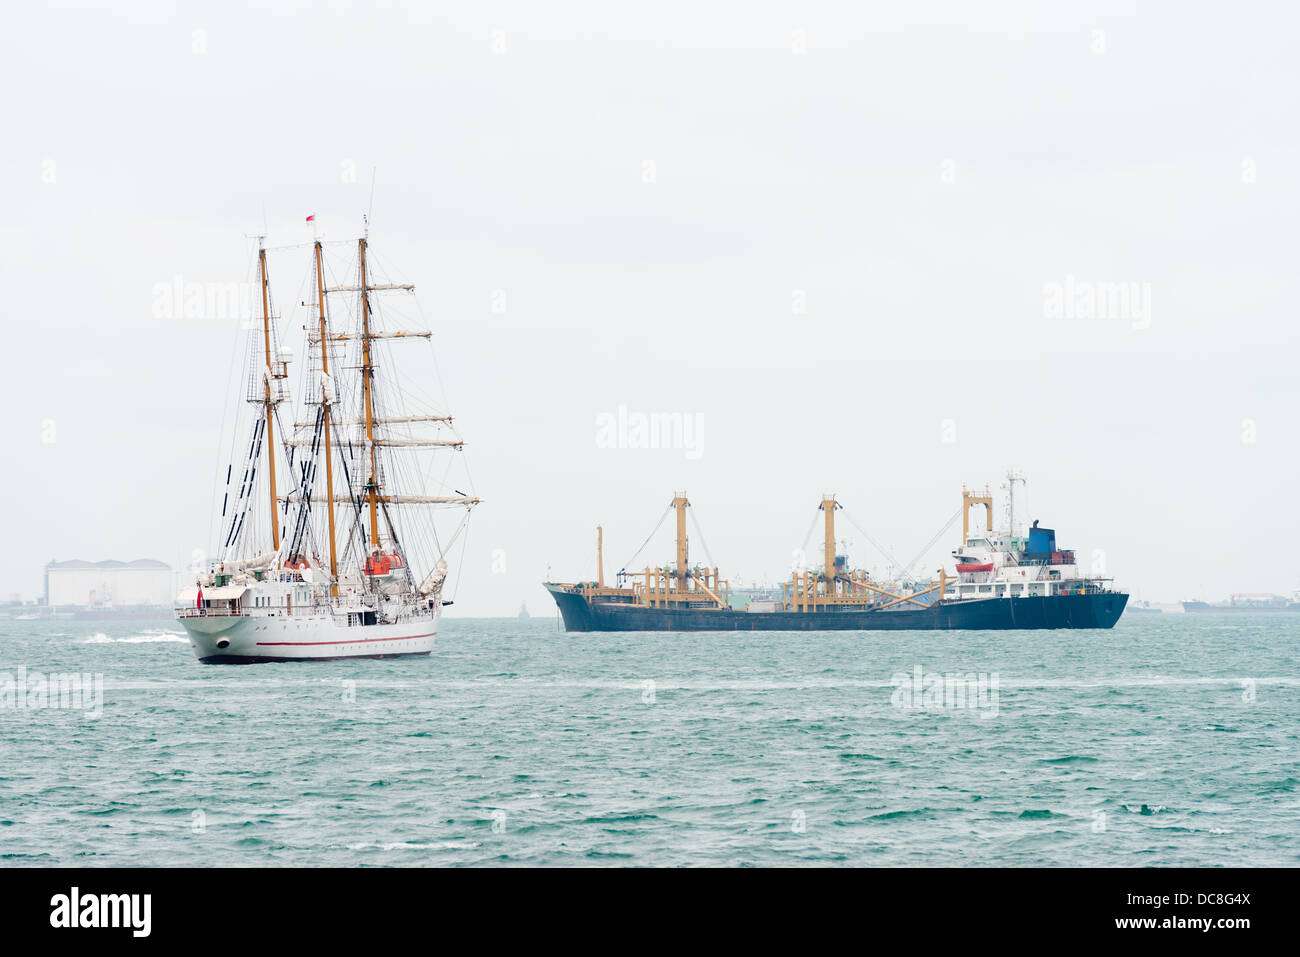 Sailing vessel ship and oil tanker on the sea near a port Stock Photo